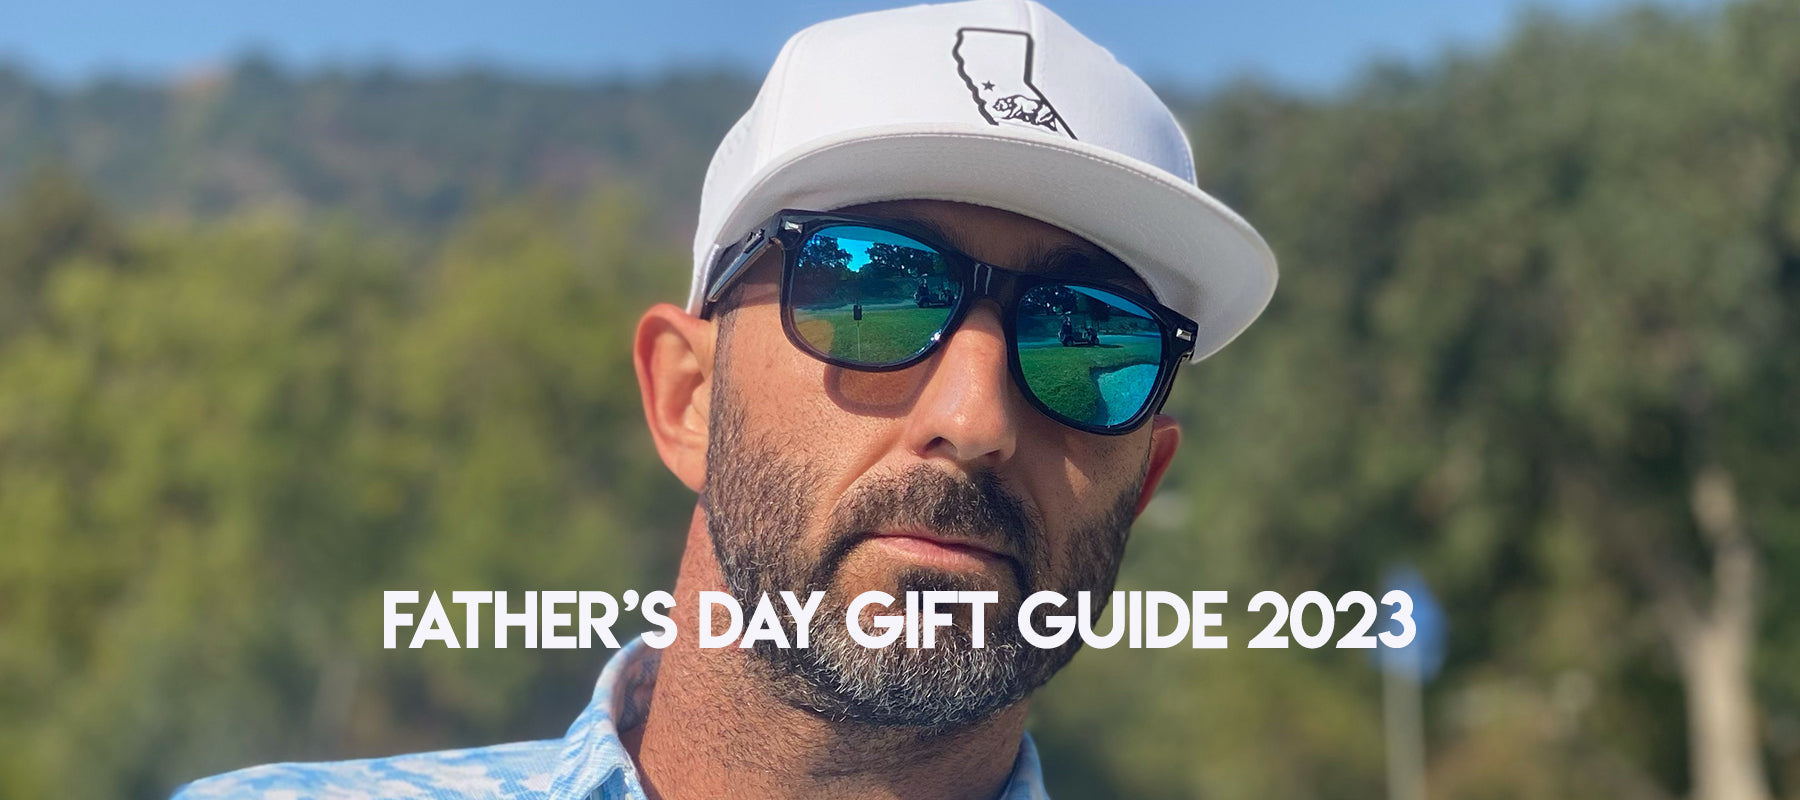 Father's Day Gift Guide: Stylish Sunglasses for the Fashionable Dad from Tomahawk Shades